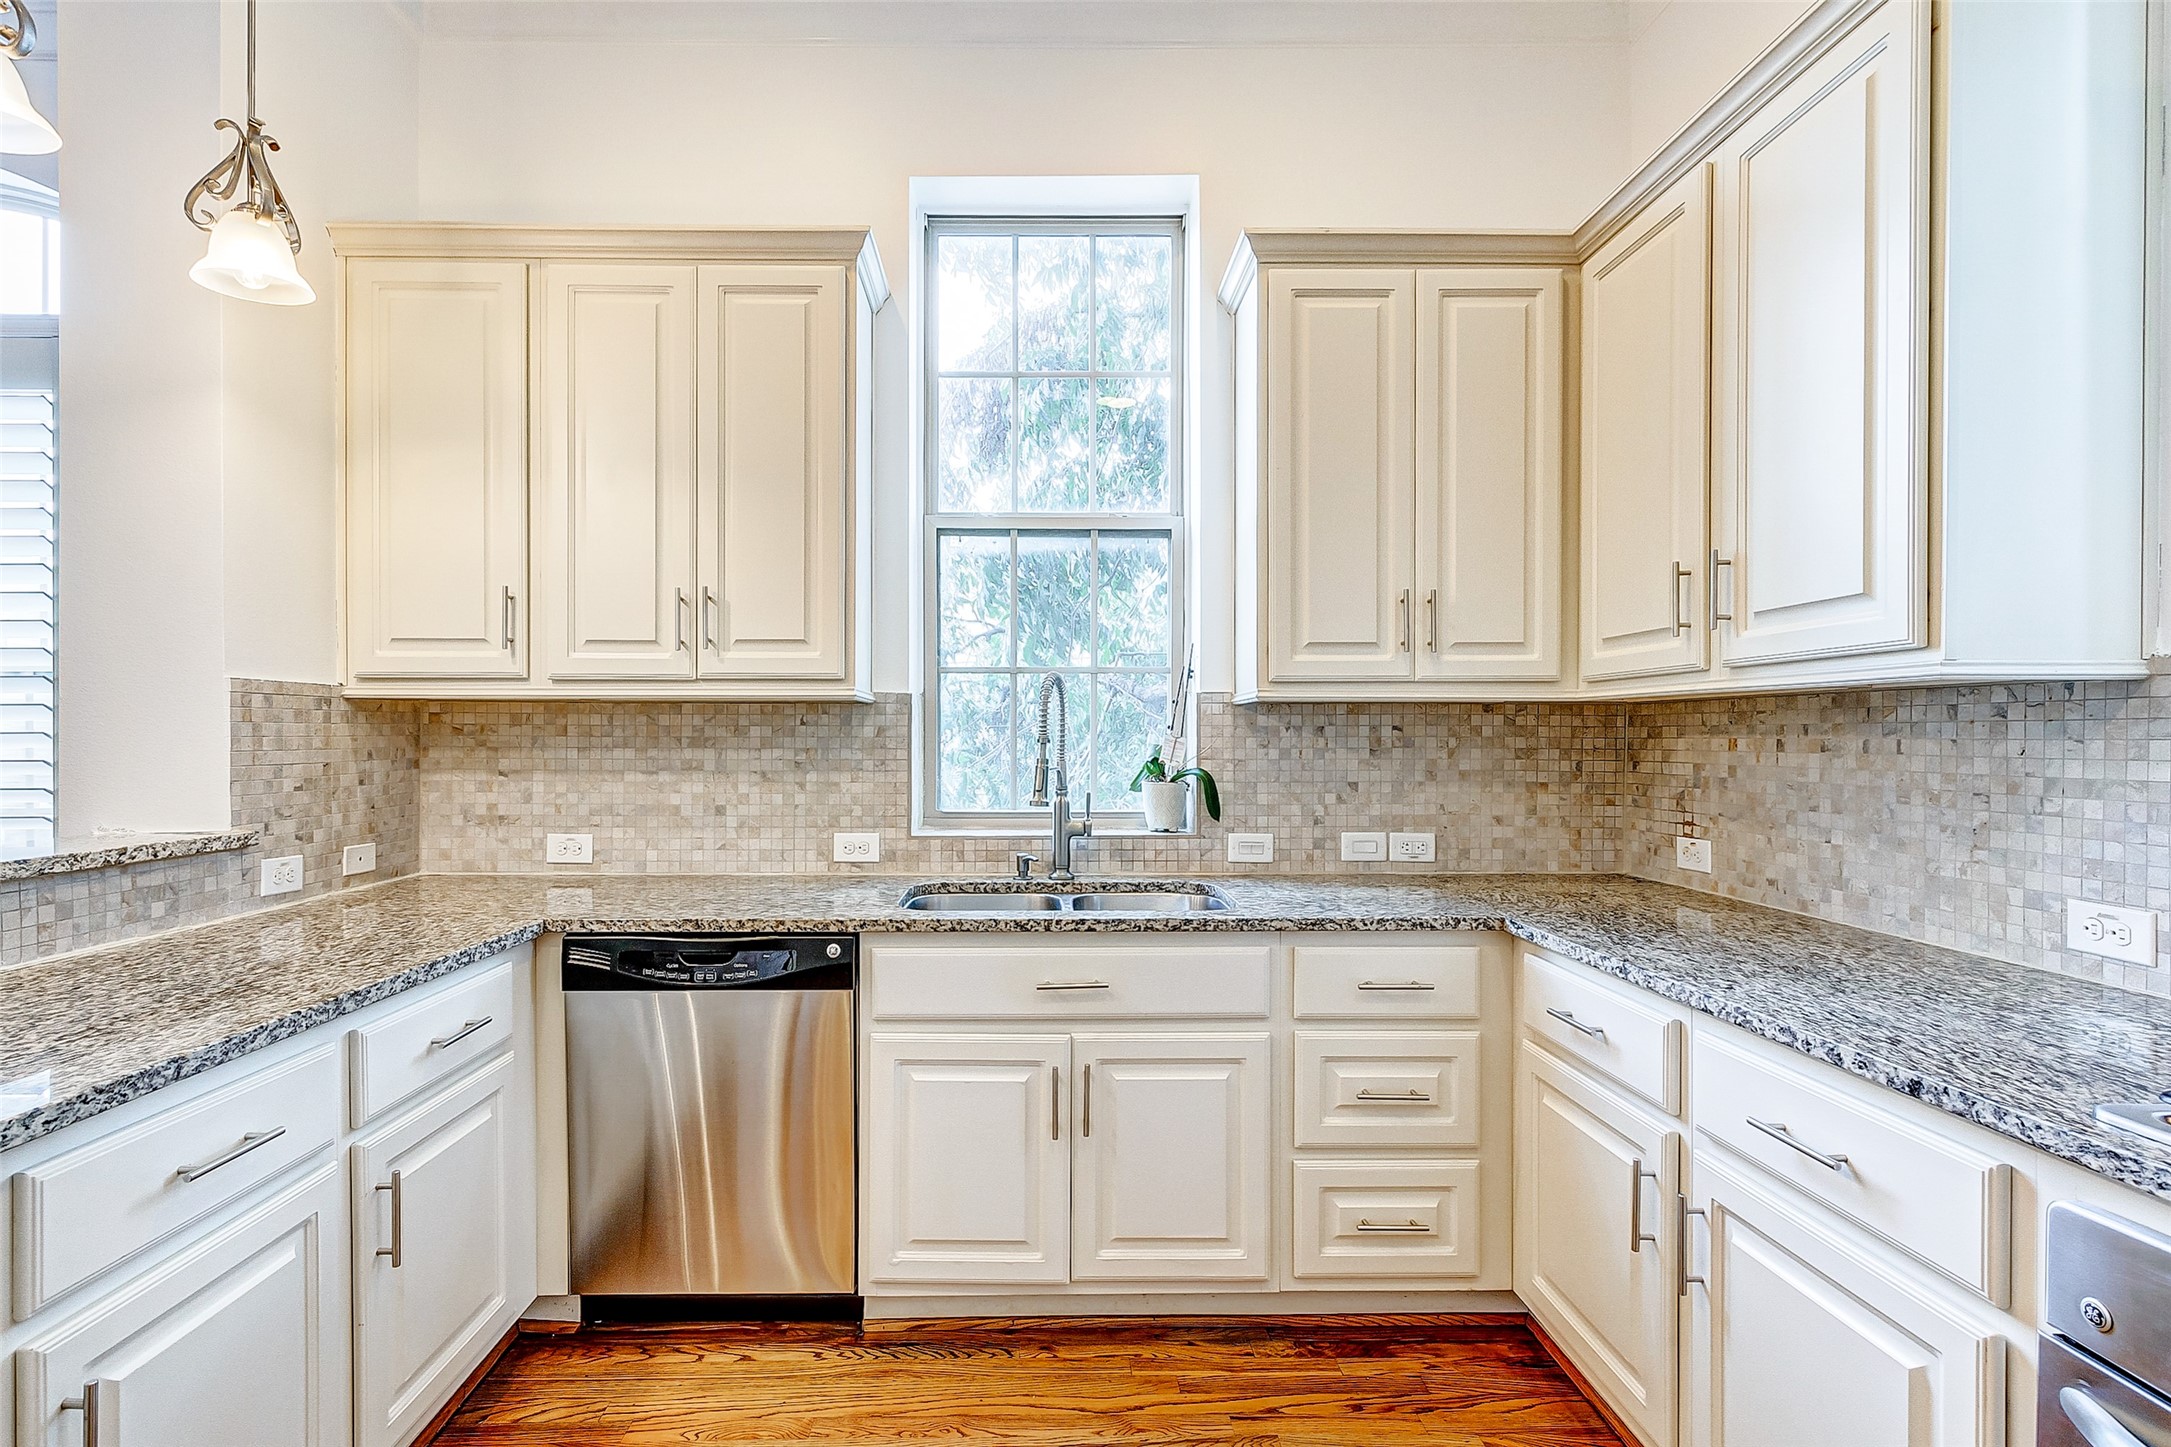 Your new kitchen offers plenty of counter space for preparing family meals.